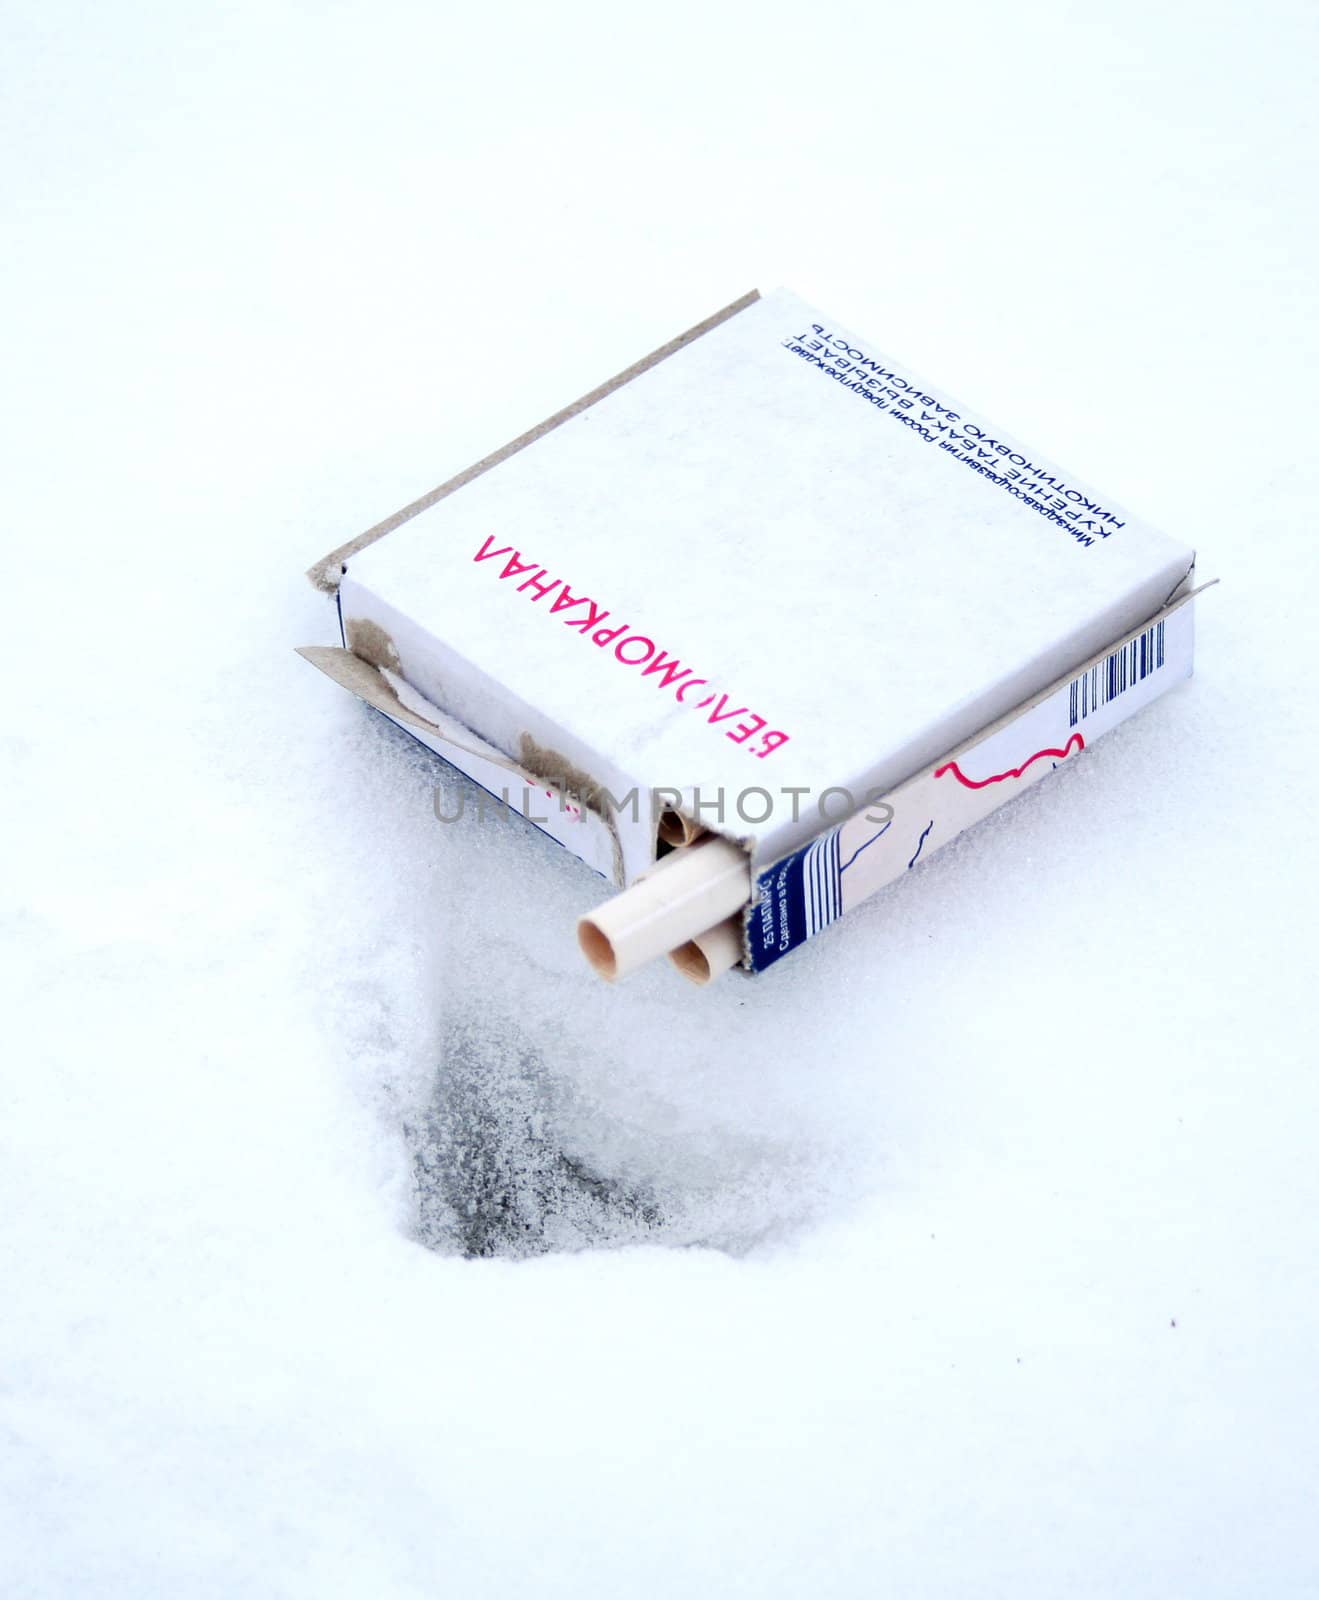 Cigarettes on the snow. Don't smoking!